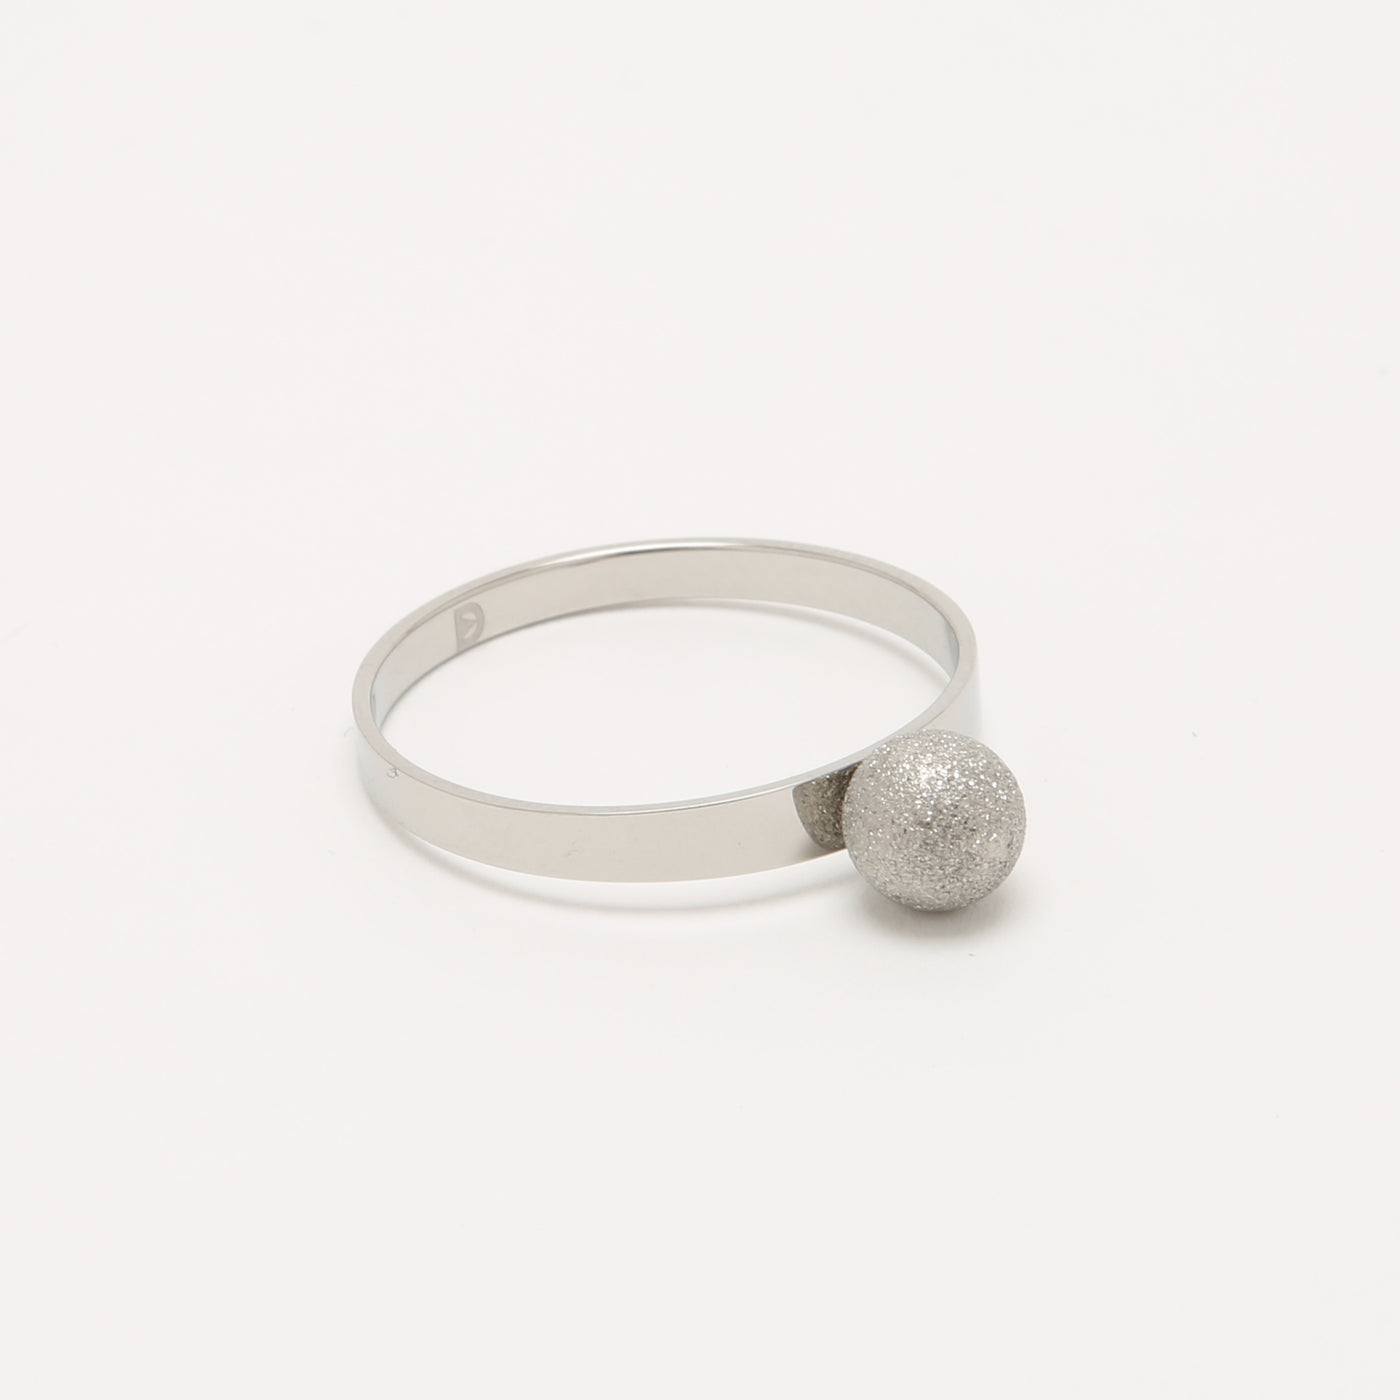 Everyday Self Defence Ring Jewelry | Stardust Defender Ring